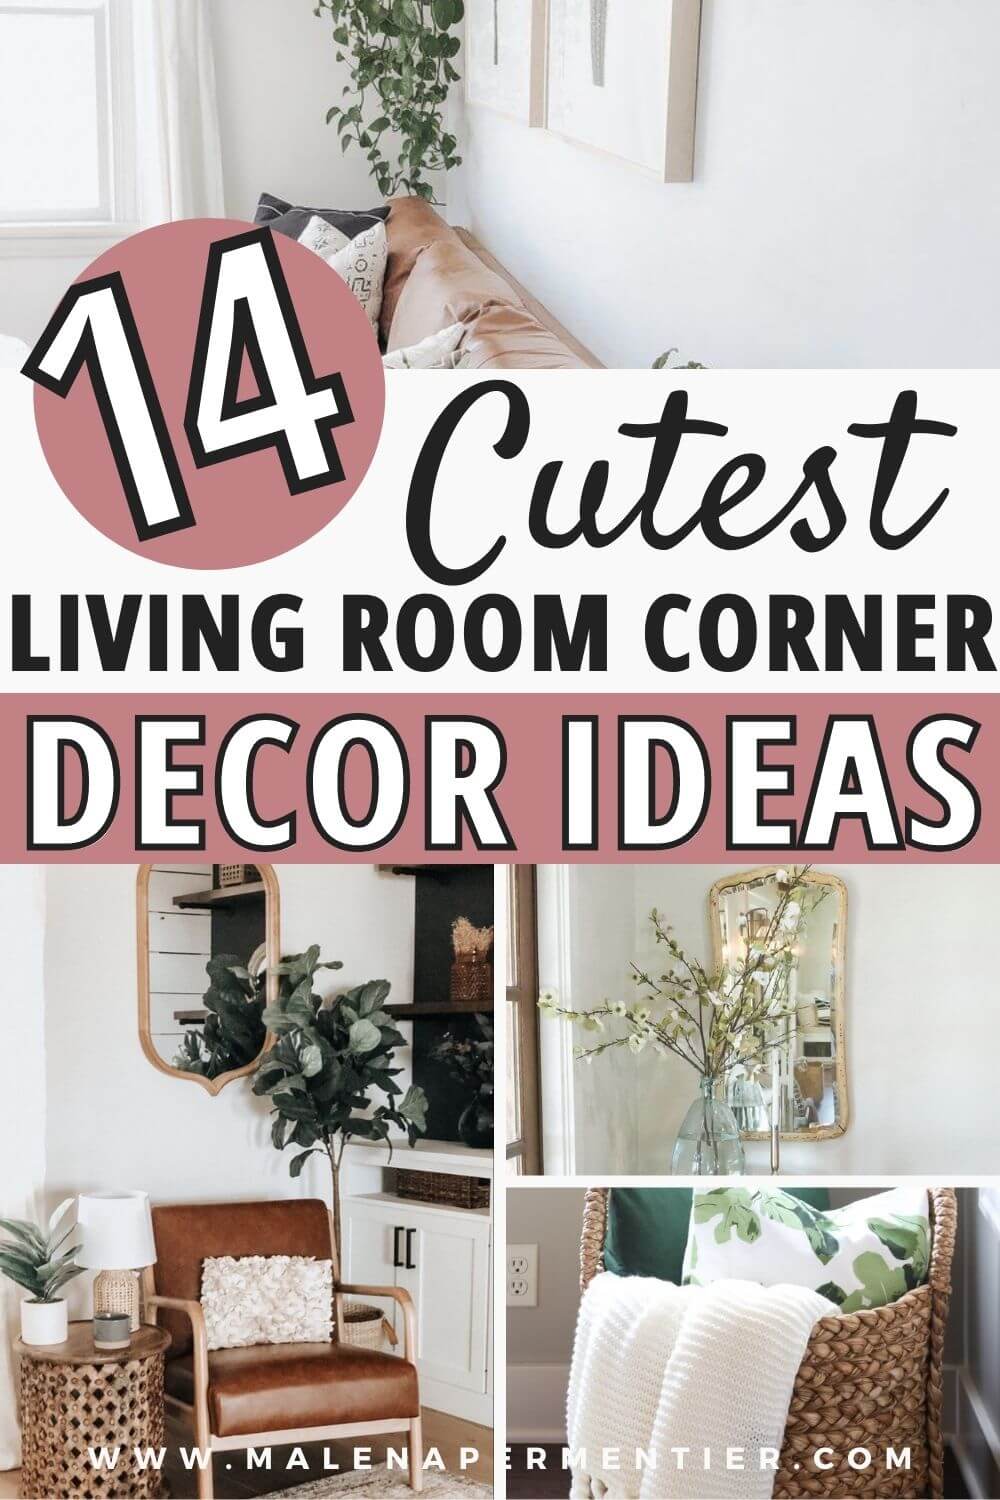 14 Creative Living Room Corner Decor Ideas To Spice Up Your Space